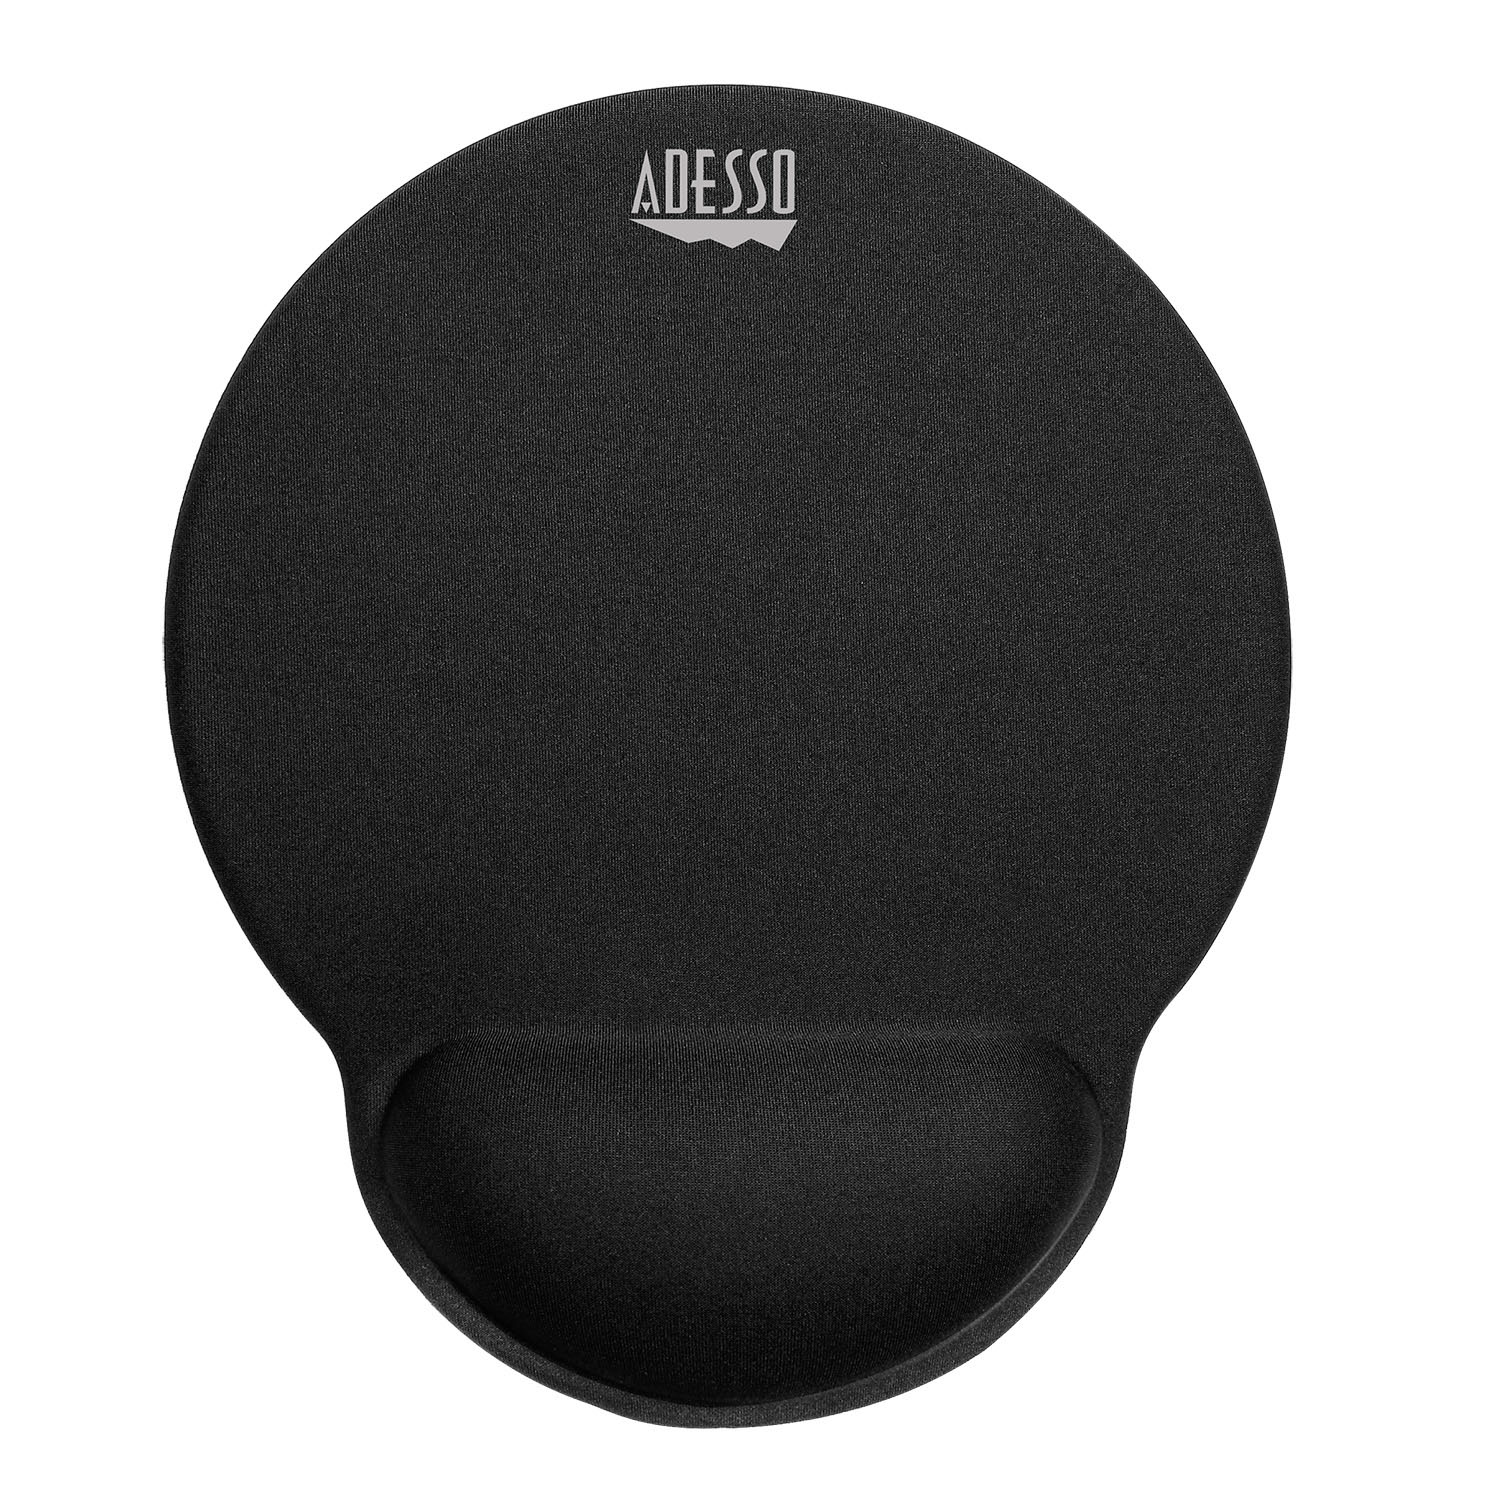 Bytecom Fanner BV Adesso Memory form filled Mouse wrist rest pad